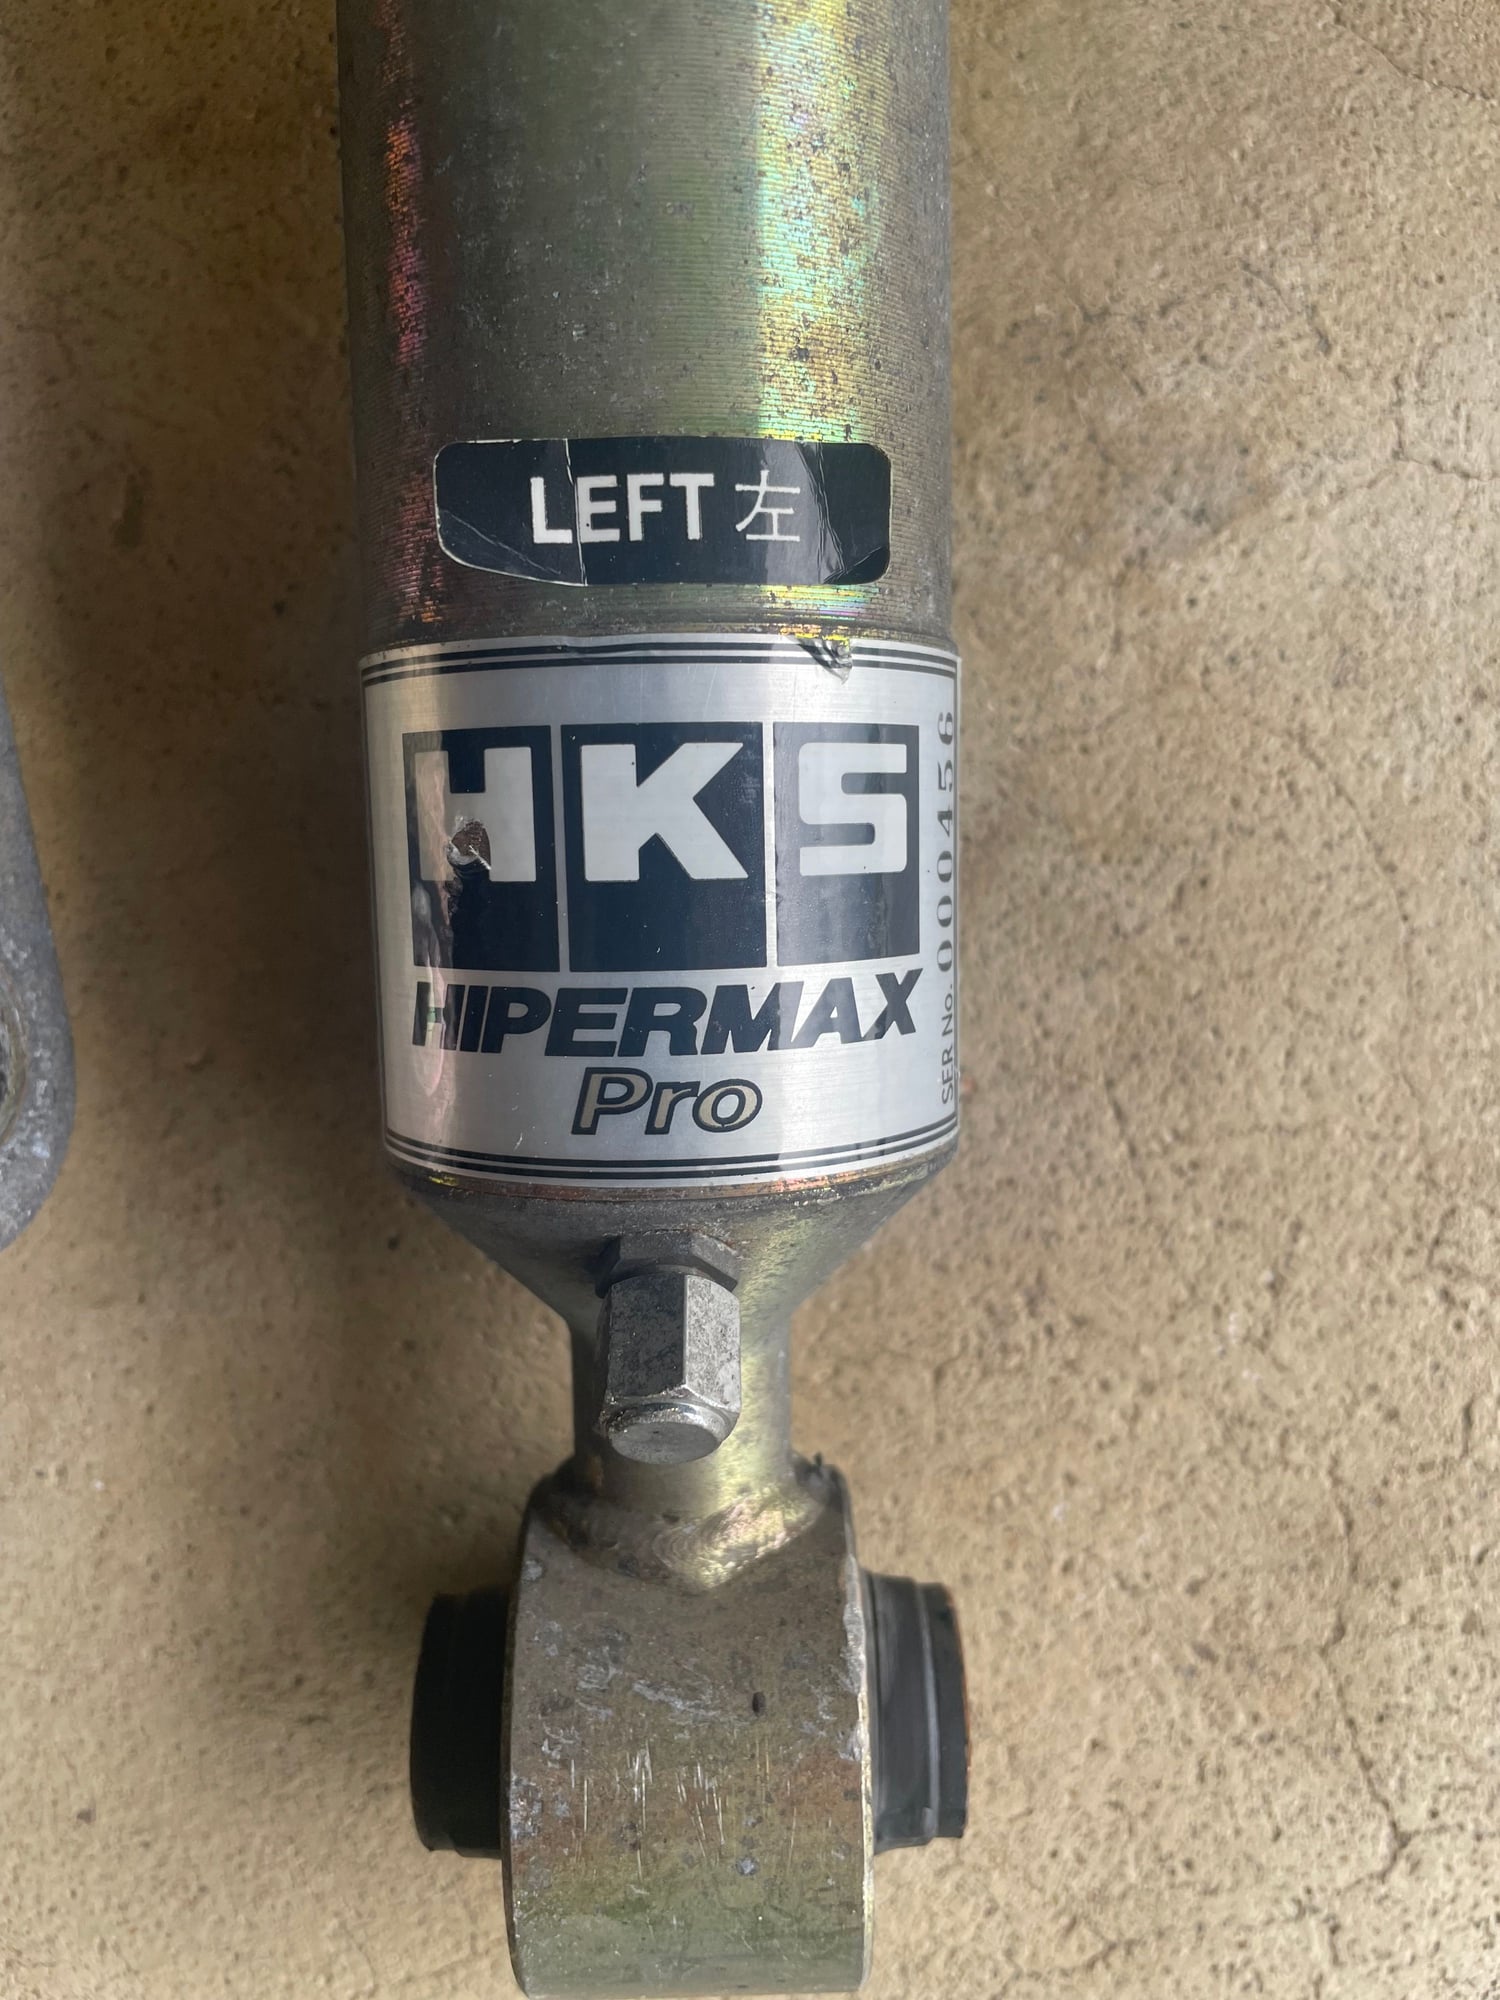 Steering/Suspension - HKS Hypermax Pro FD RX7 - Used - 1992 to 2002 Mazda RX-7 - North Canton, OH 44720, United States